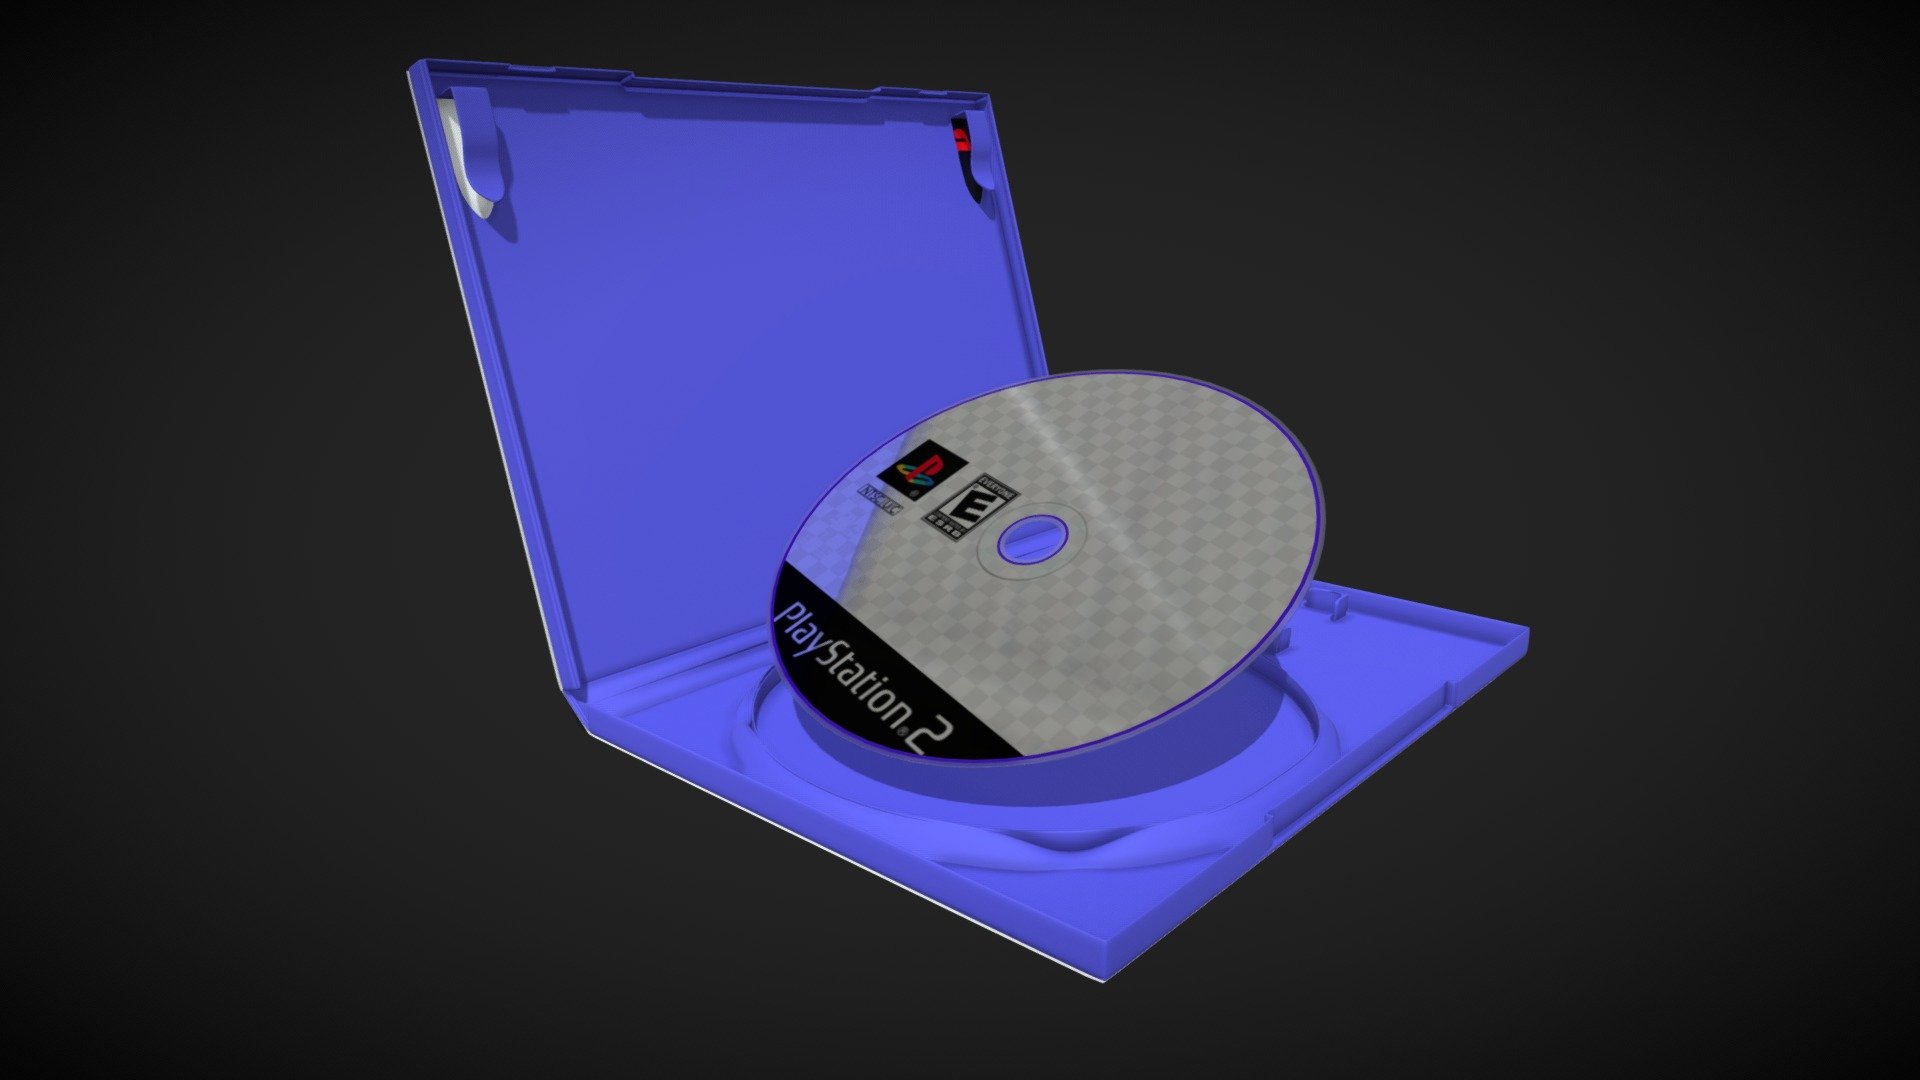 Playstation 2 Gamebox Animated subdivision ready 3d model